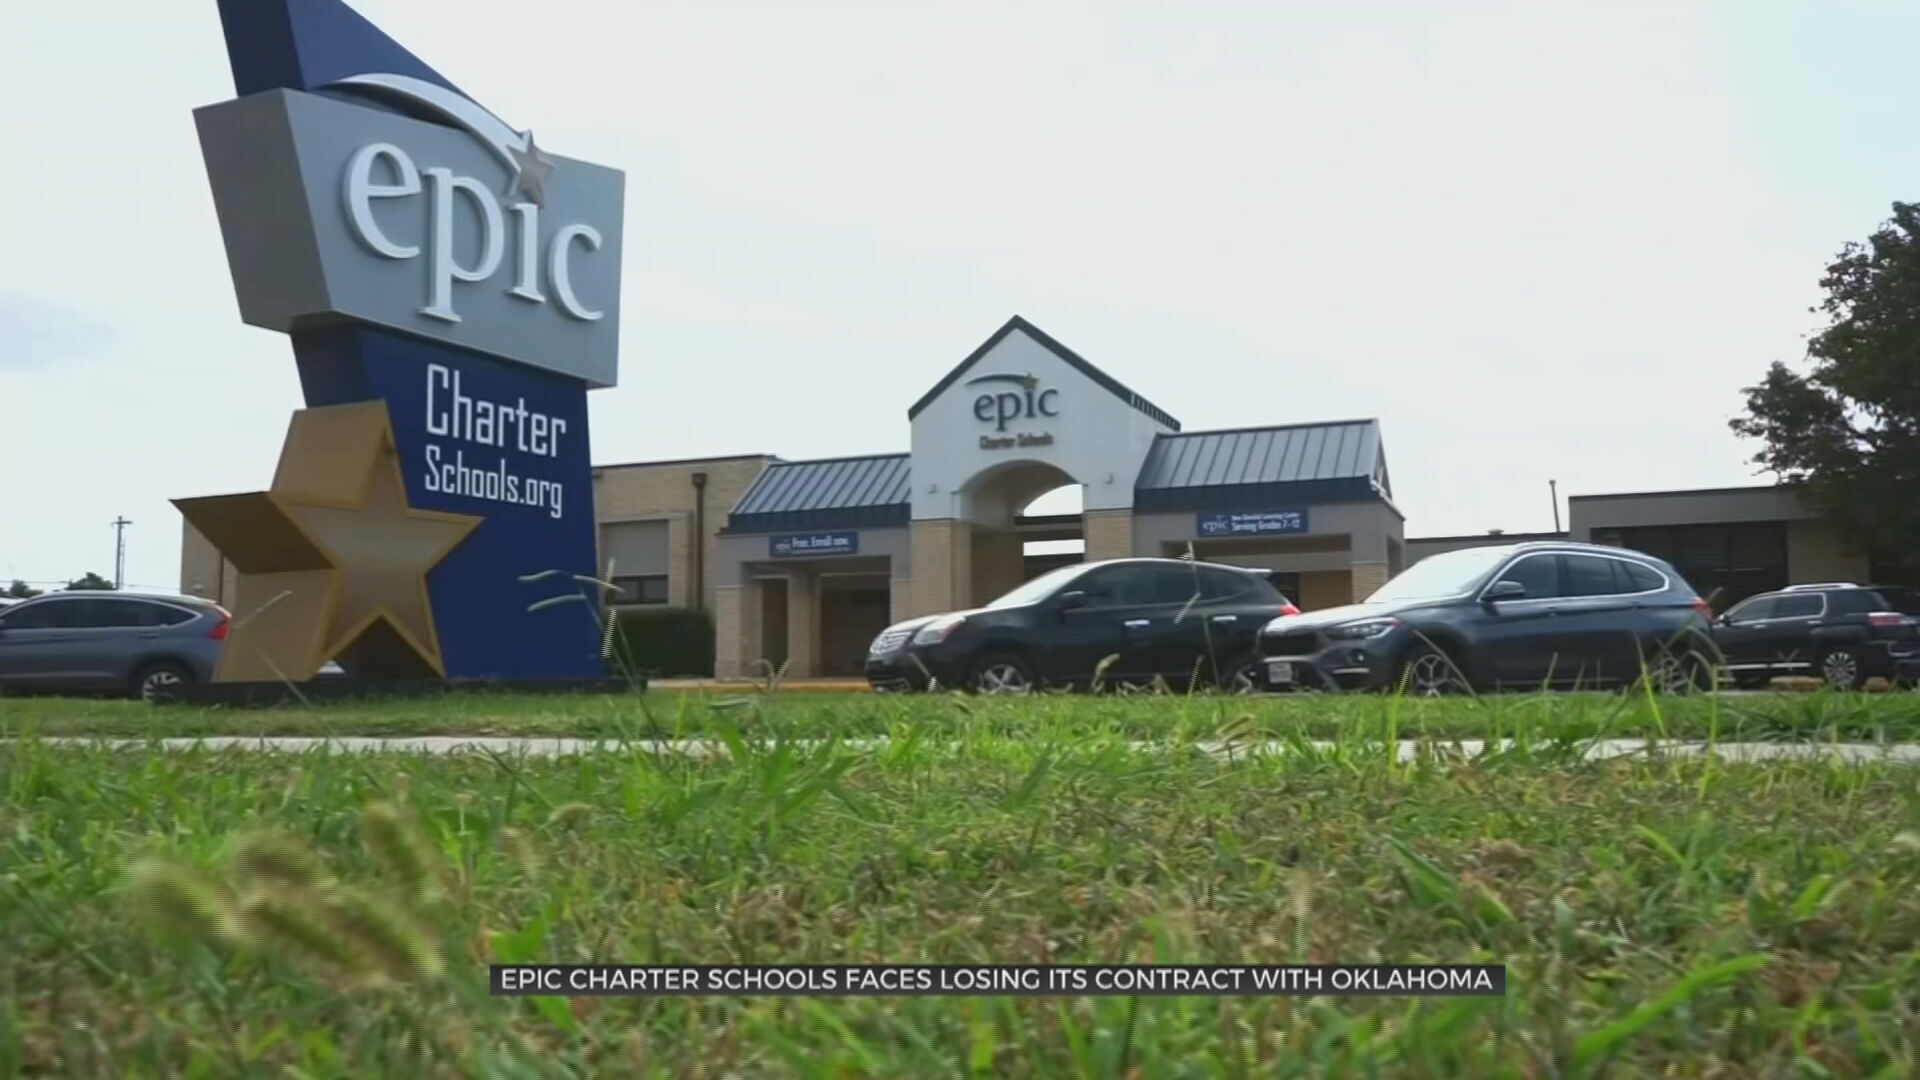 Epic Charter Schools Faces Losing Contract With Oklahoma